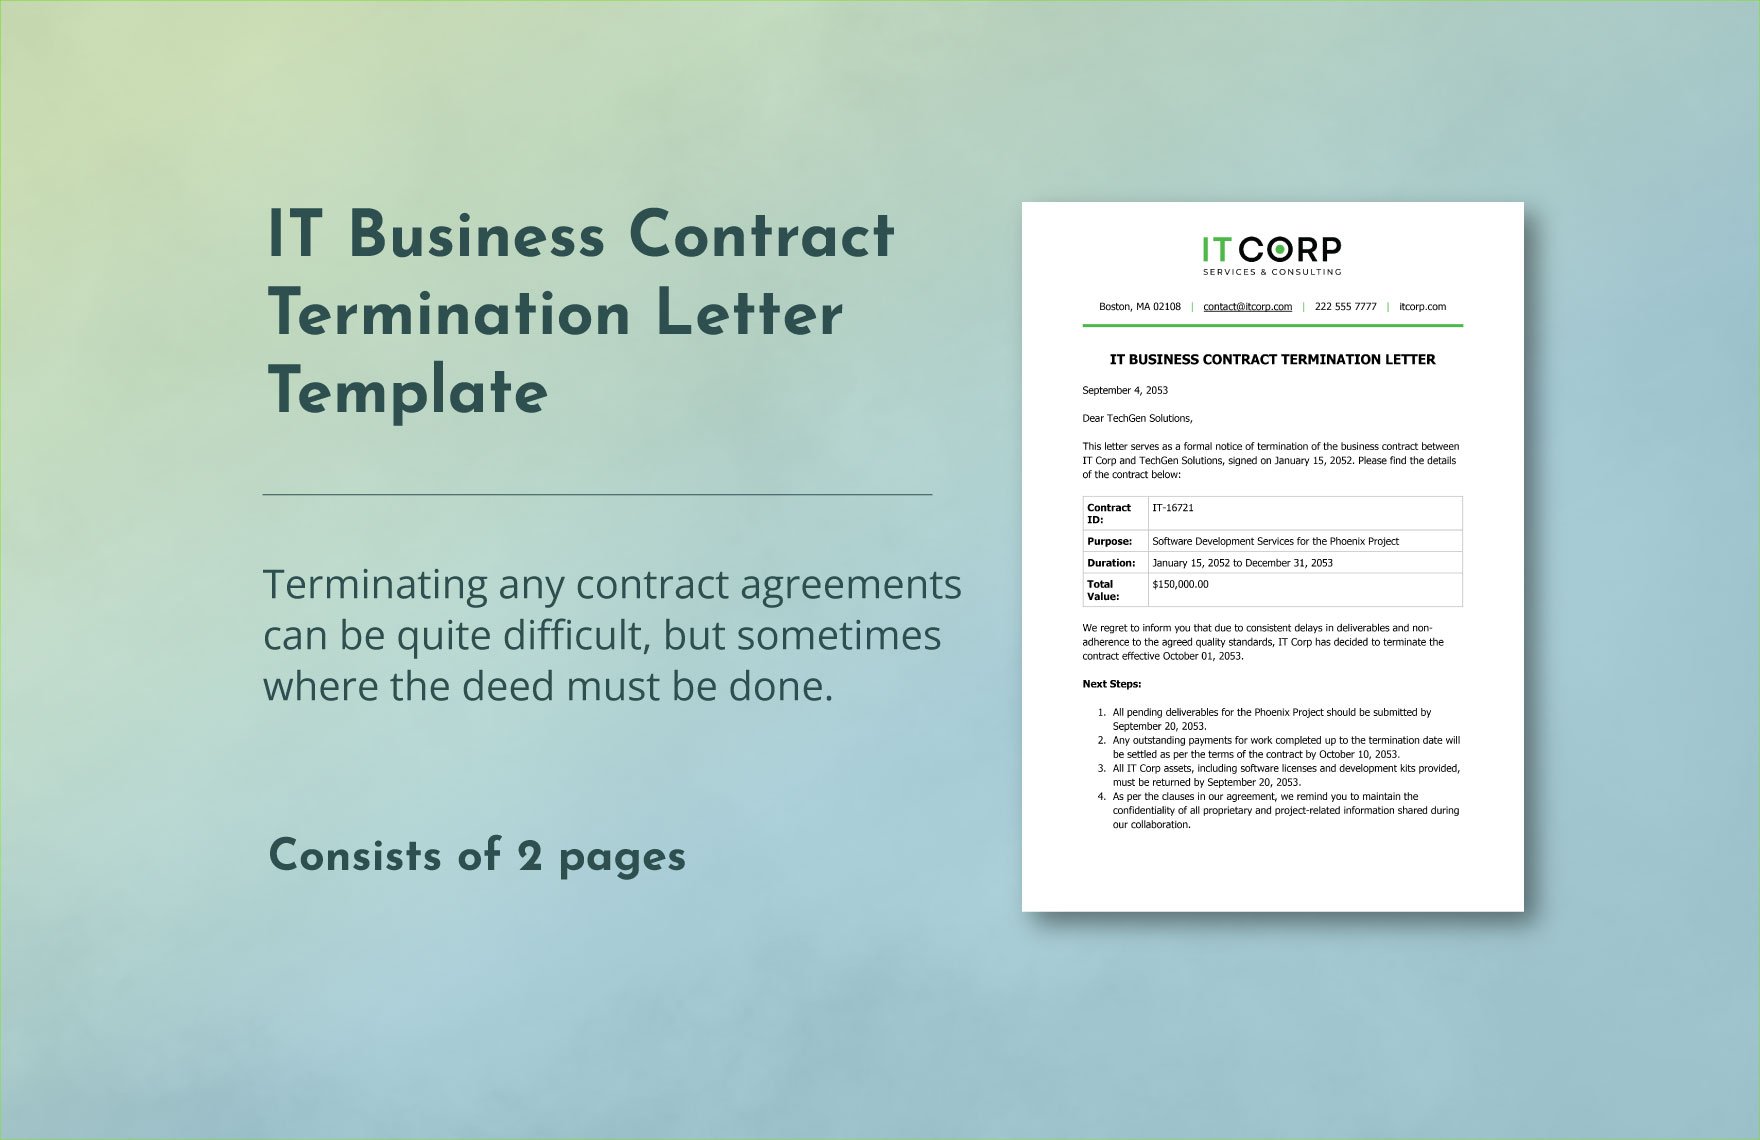 IT Business Contract Termination Letter Template